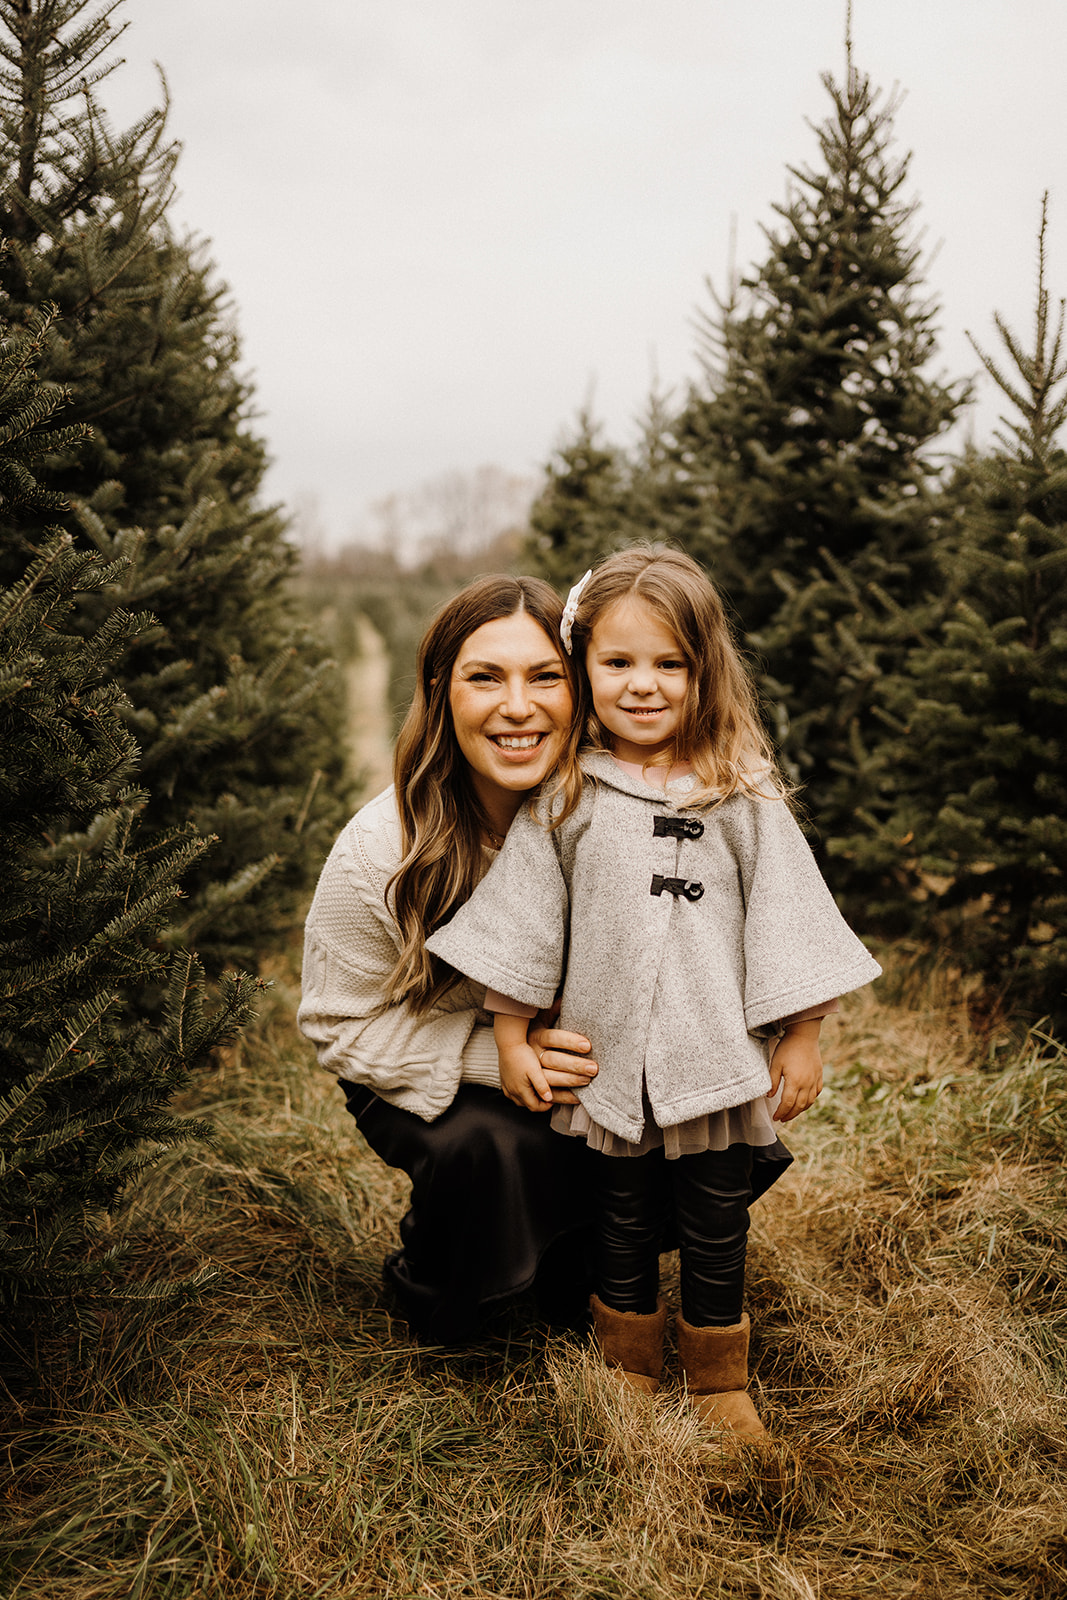 A daughter standing with her mother beside her with Christmas Tress around them.